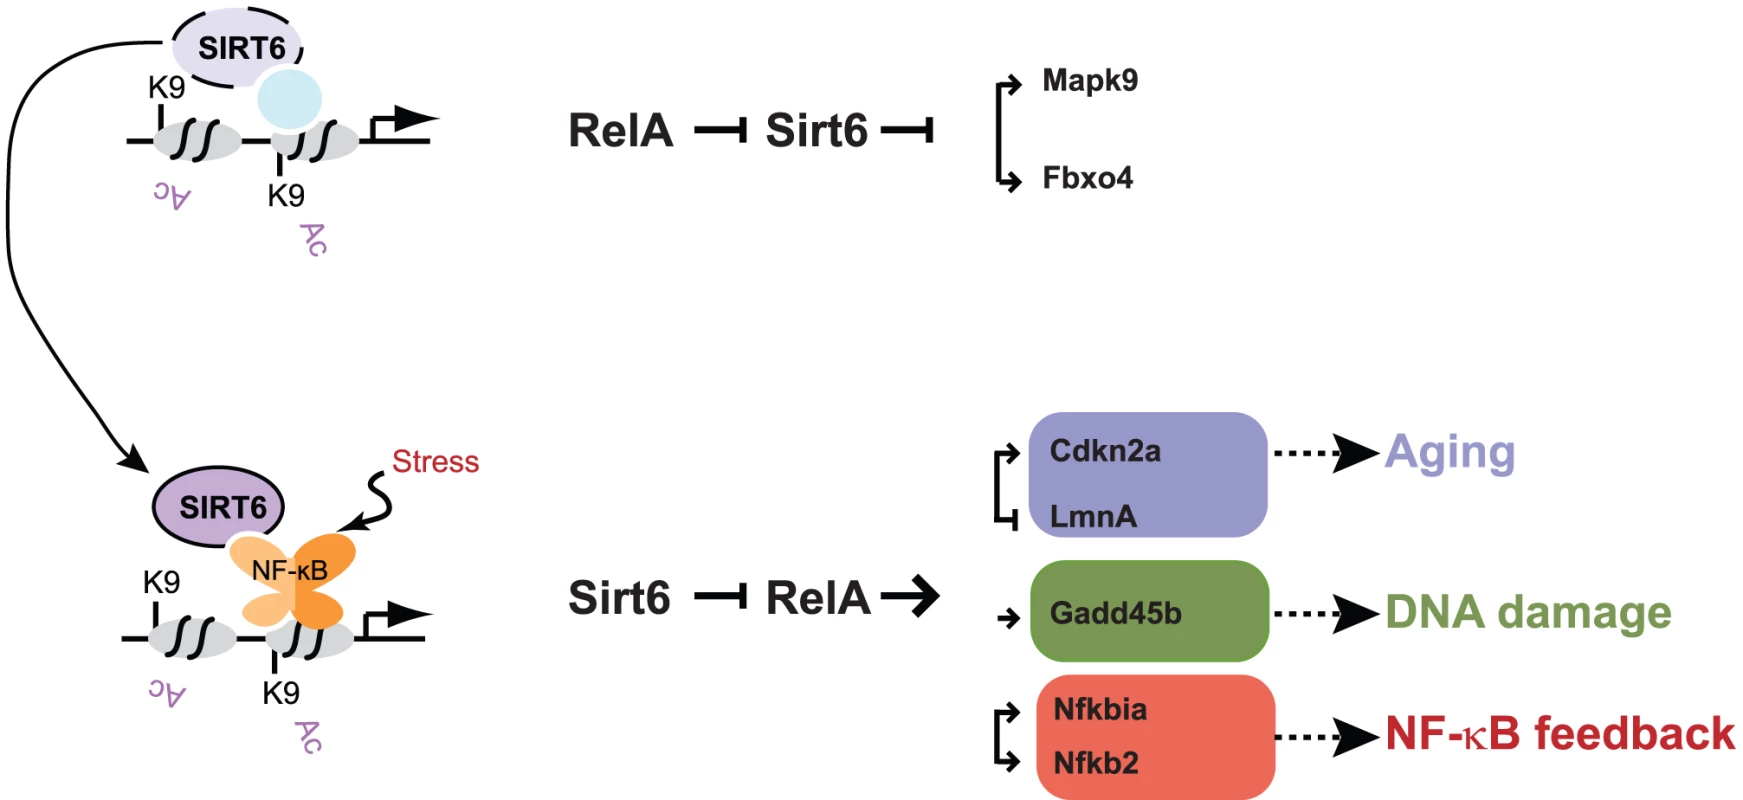 Model for Sirt6 regulation of targeting and gene expression.